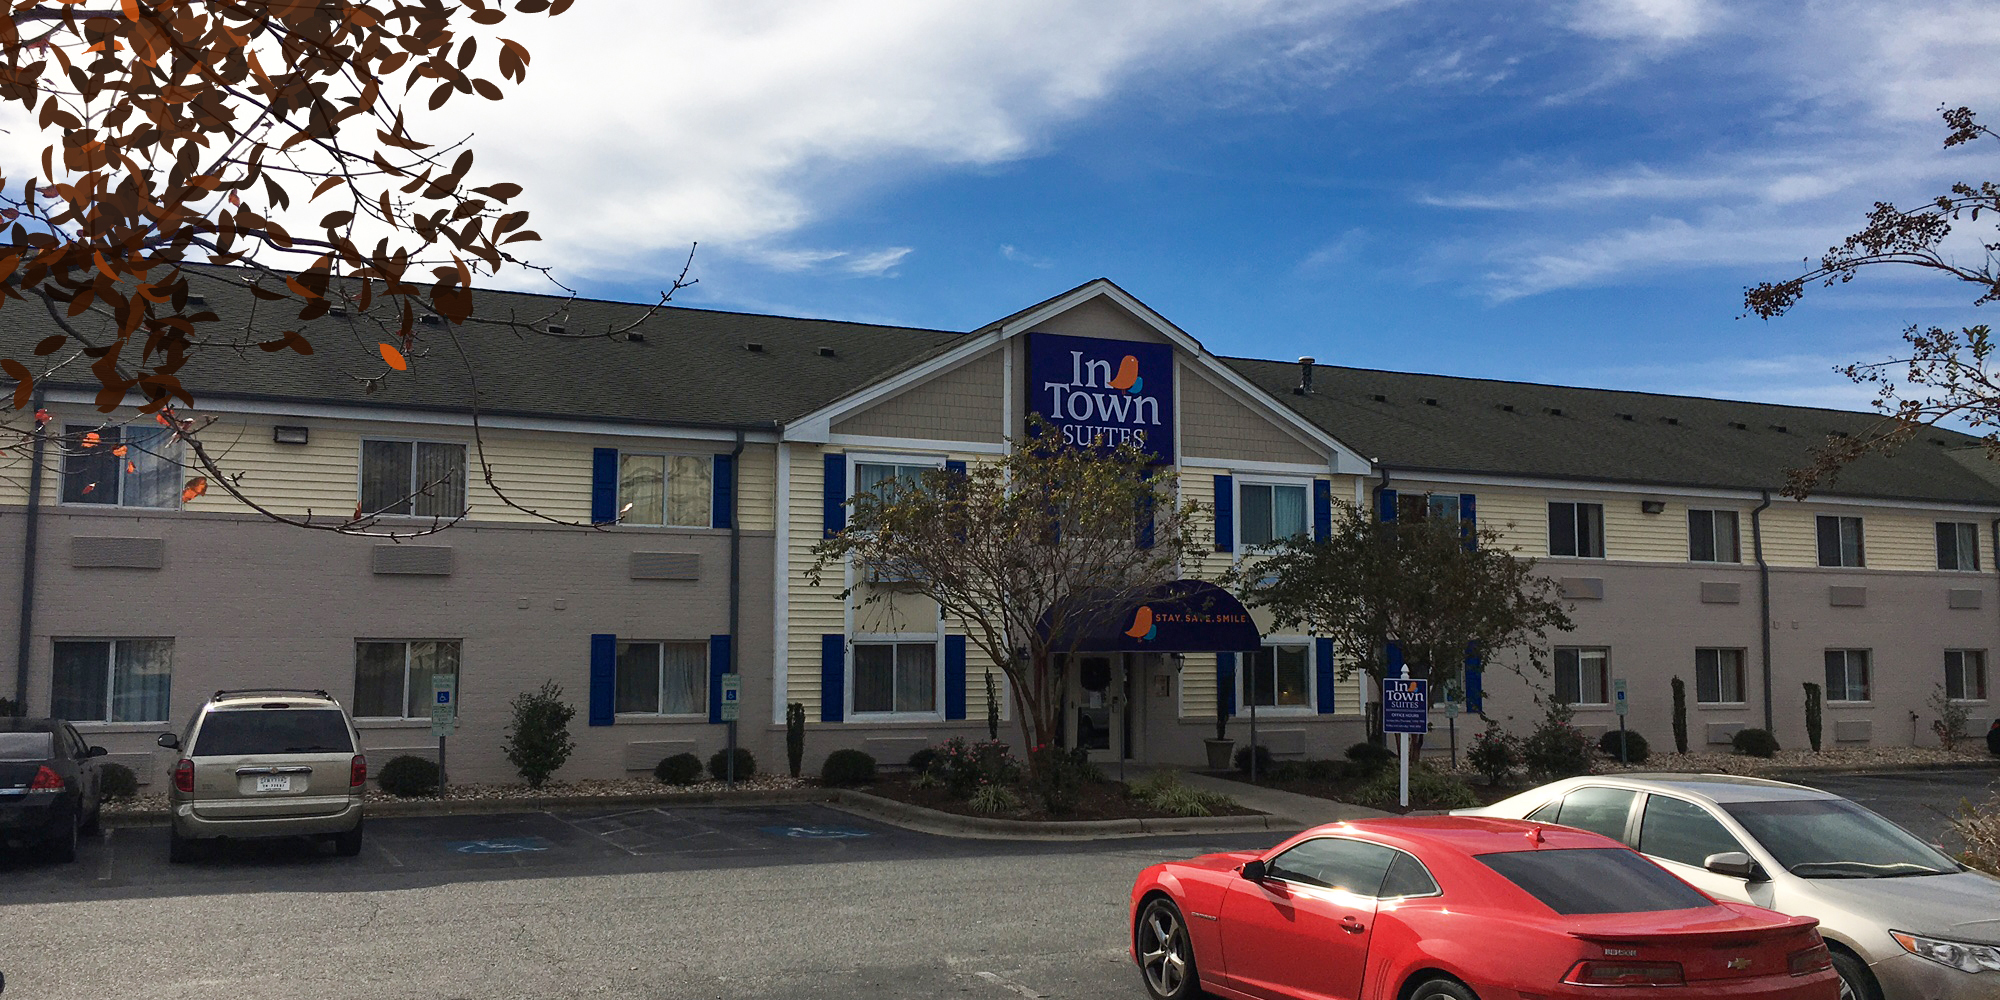 Photo of InTown Suites Greenville, Greenville, NC